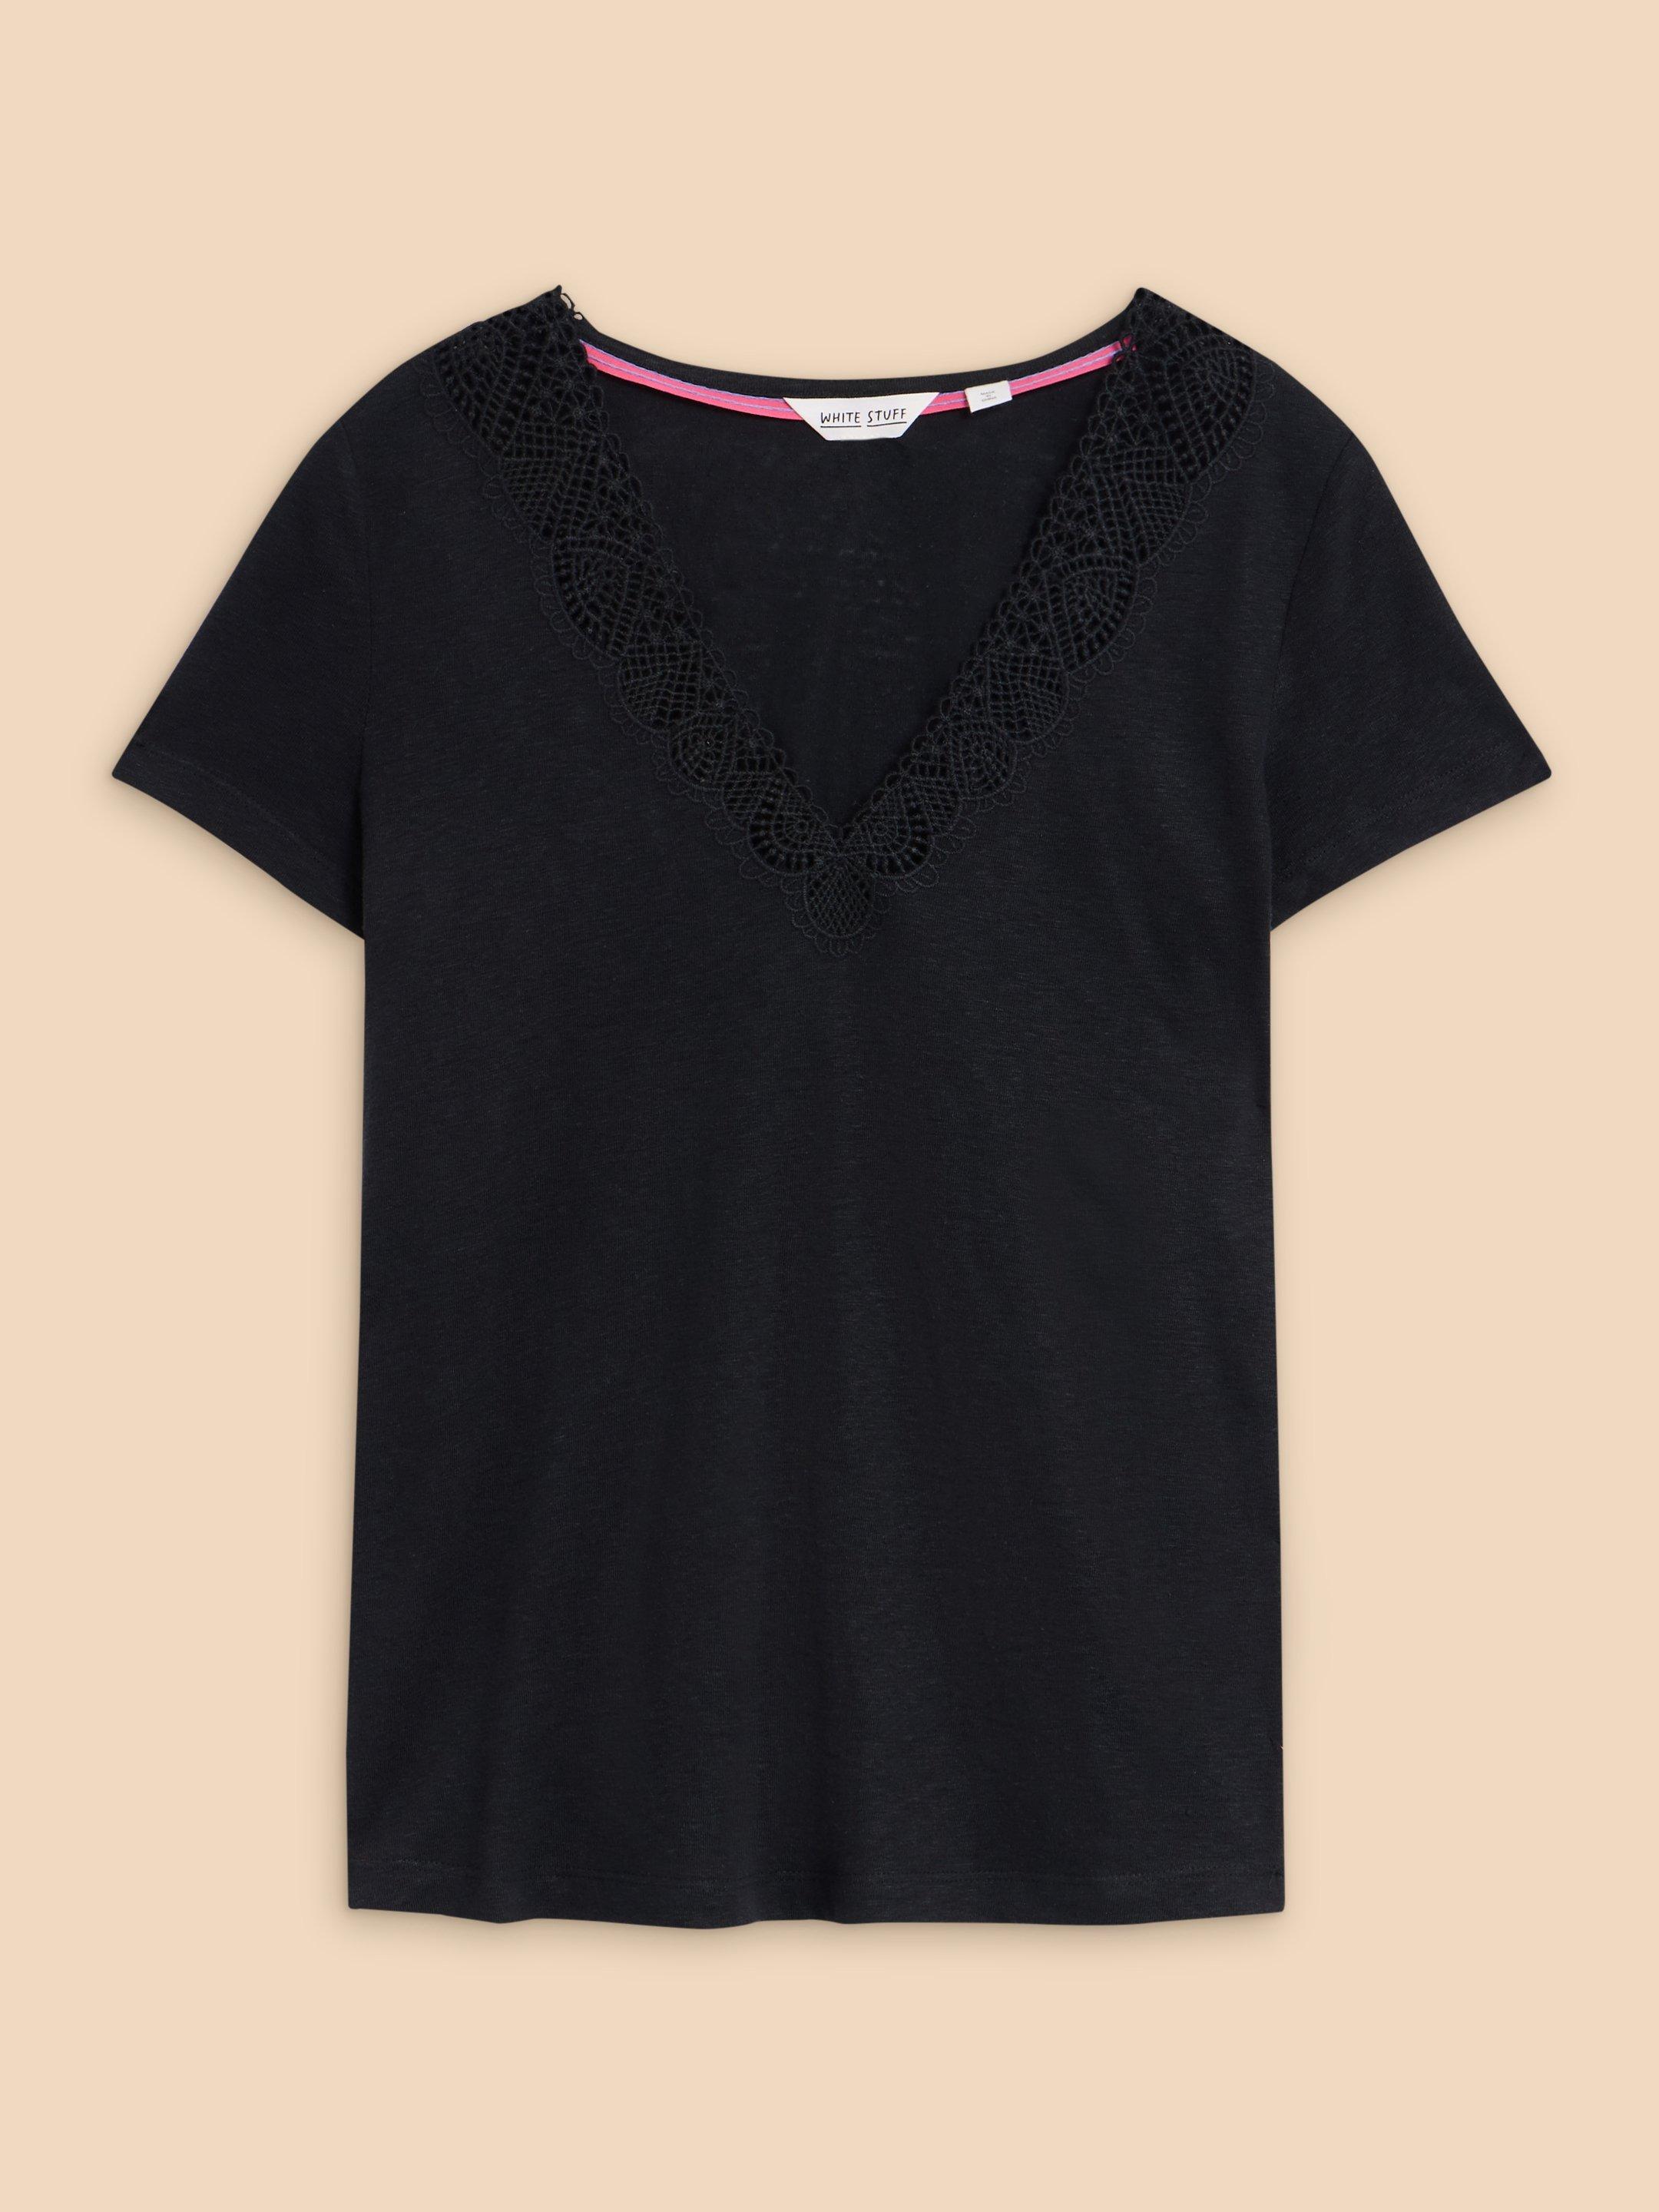 ELLIE LACE TEE in PURE BLK - FLAT FRONT